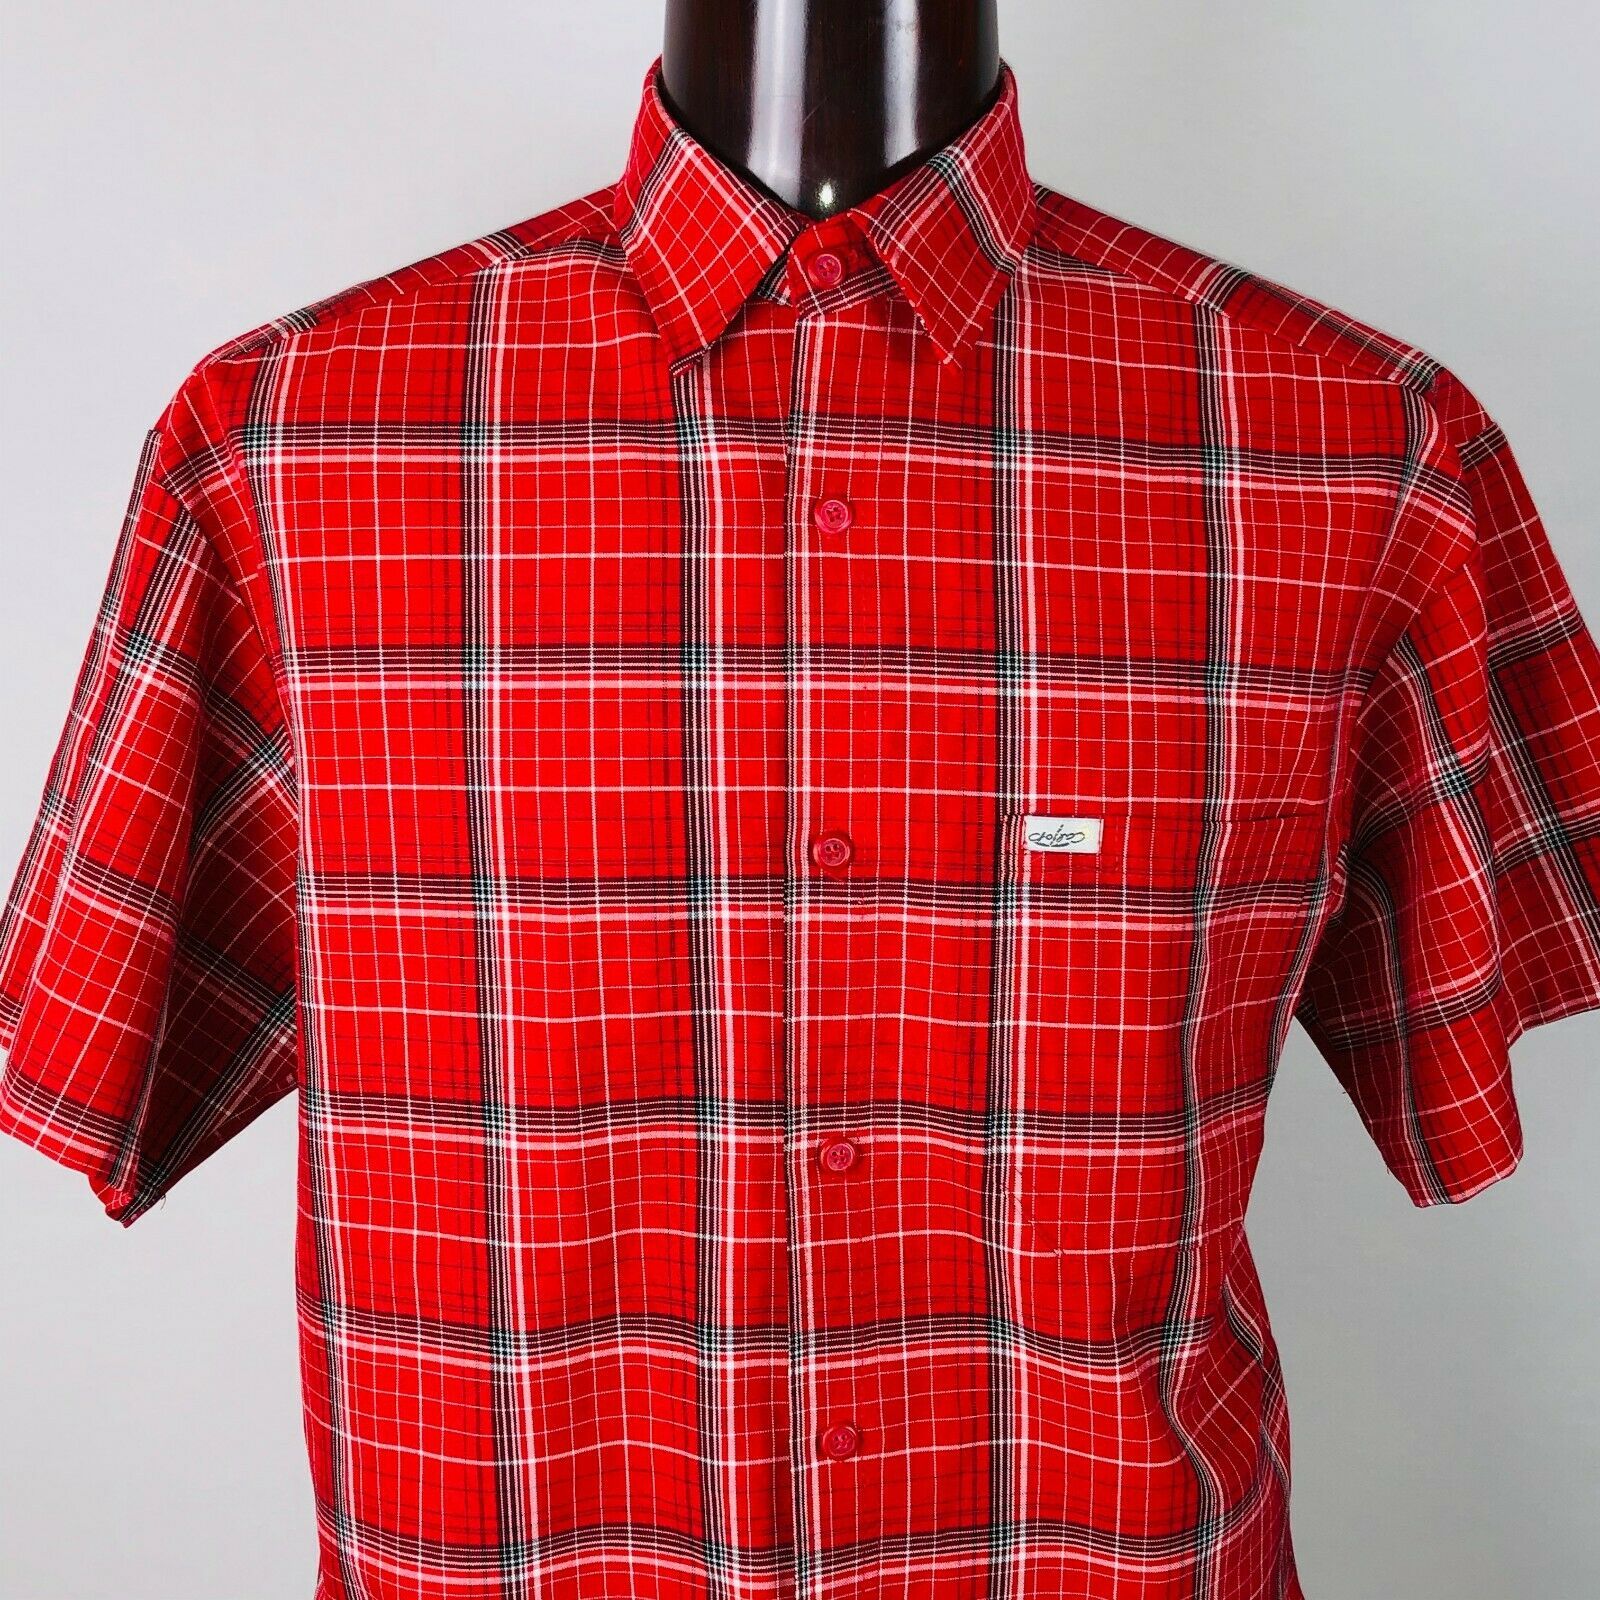 red and white plaid button down shirt